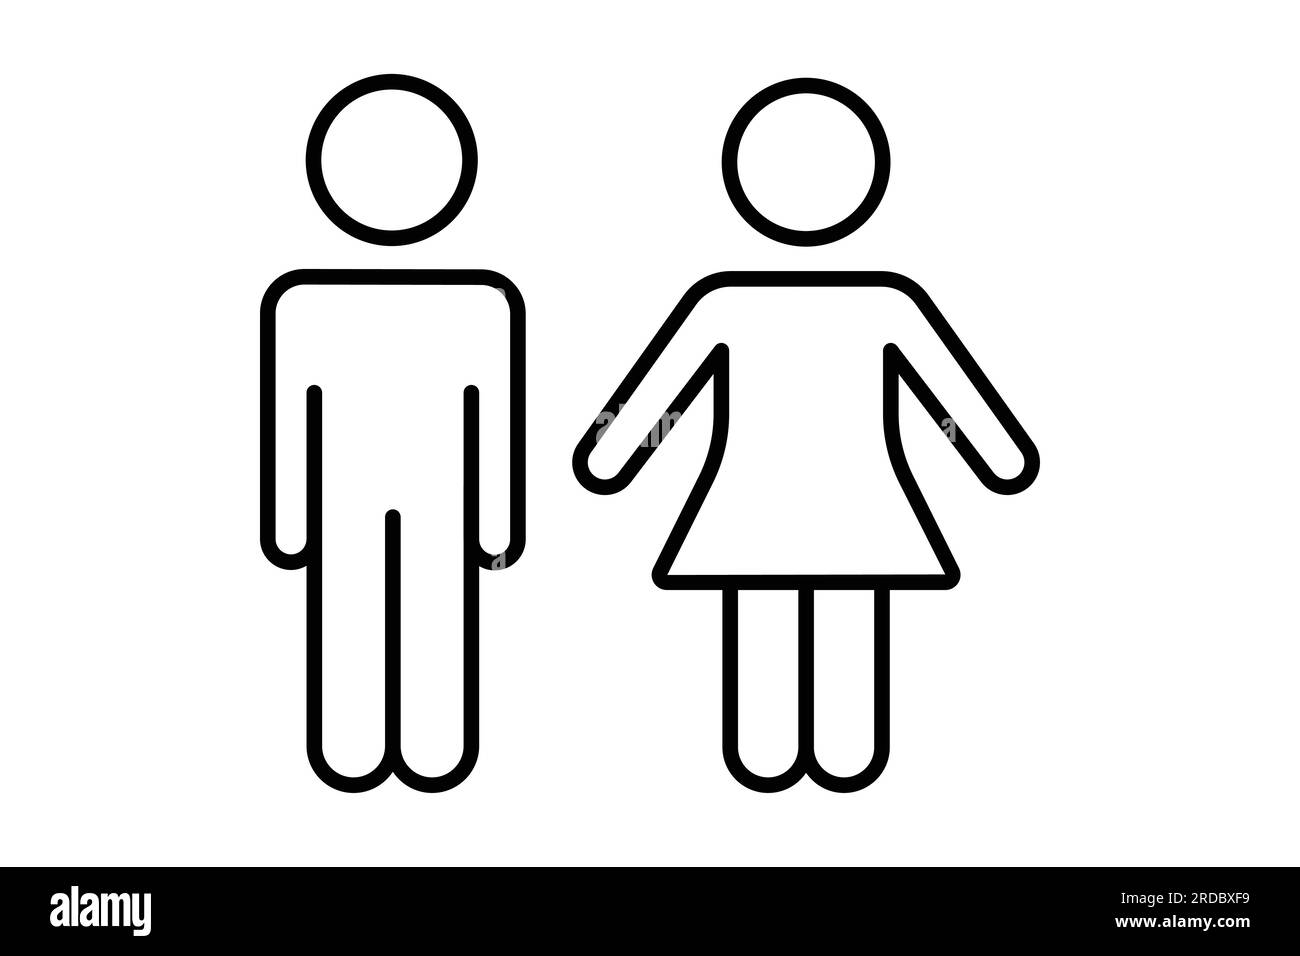 man and woman icon. icon related to sign toilet, dressing room, bathroom. Line icon style design. Simple vector design editable Stock Vector